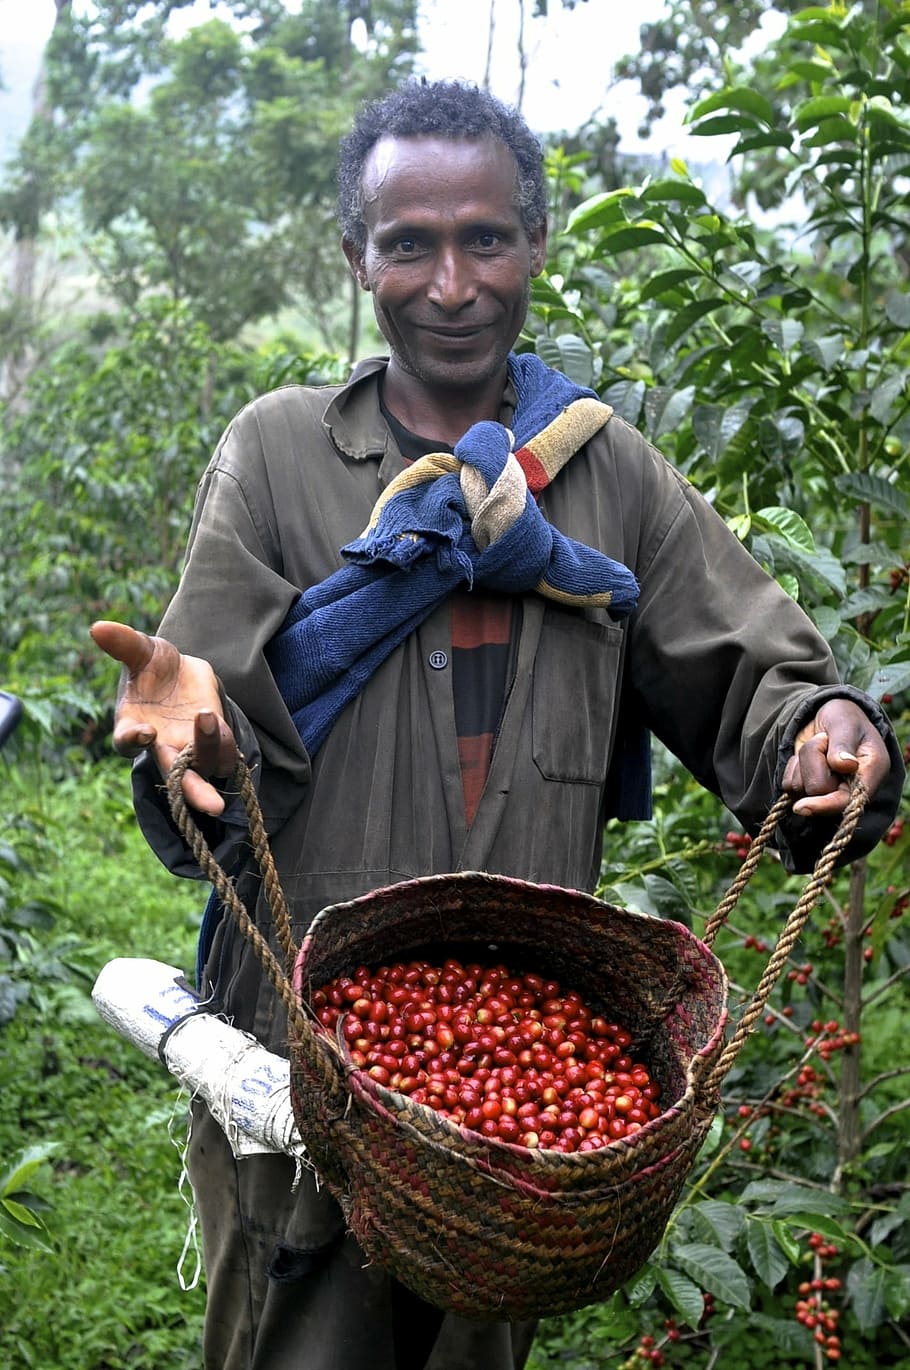 ethio, coffee, farm, men, agriculture, outdoors, people, harvesting, one Person, nature